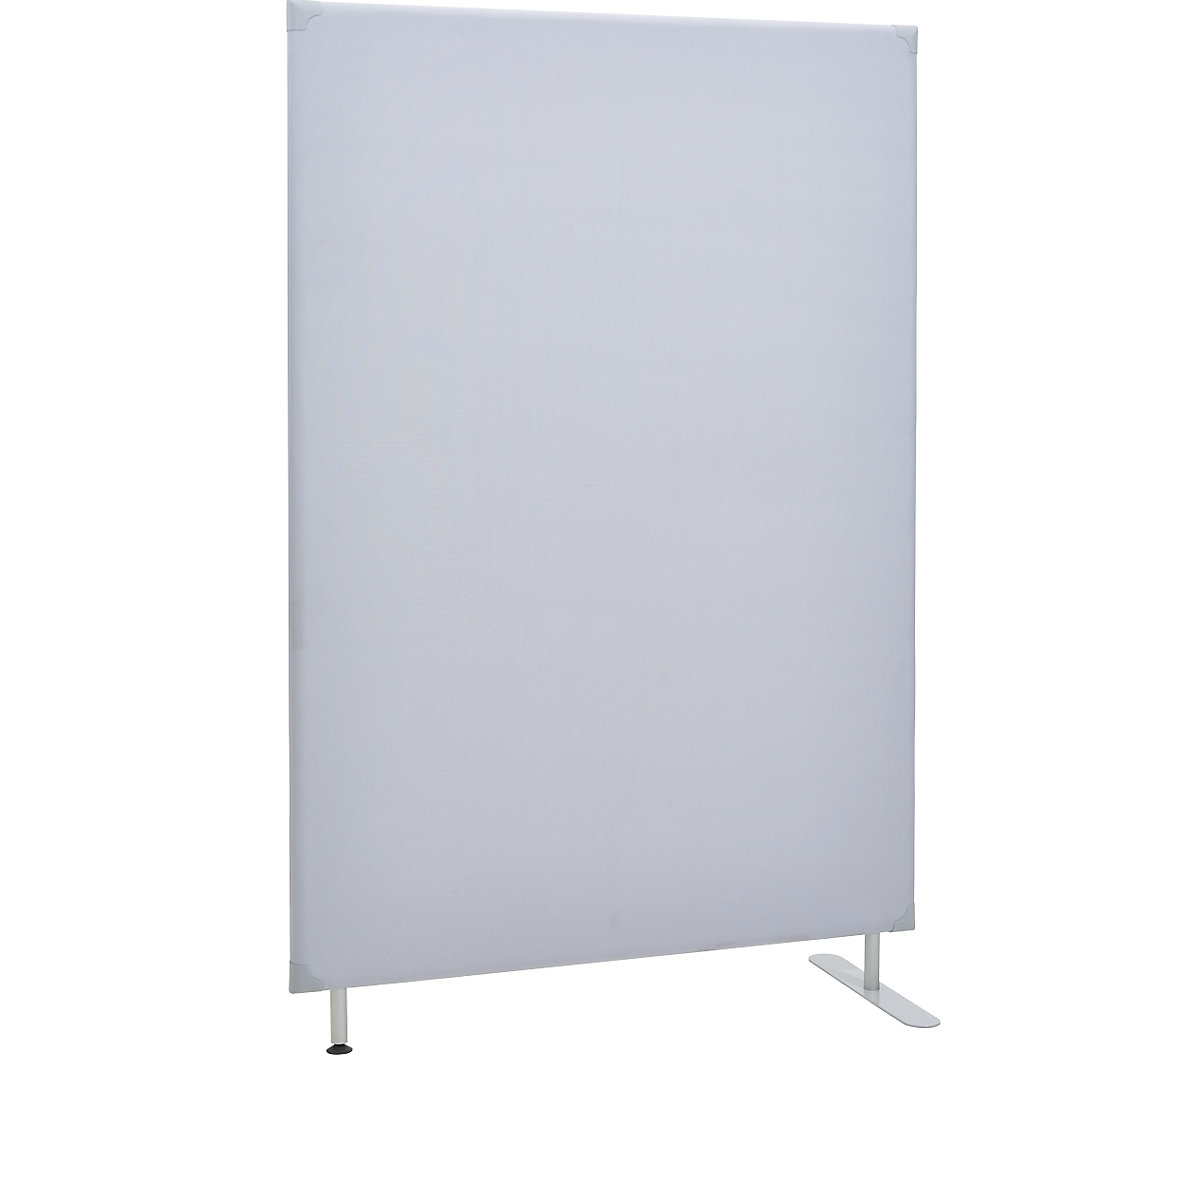 Soundproof partition – eurokraft pro, wall panel, height 1800 mm, width 1200 mm, grey-7